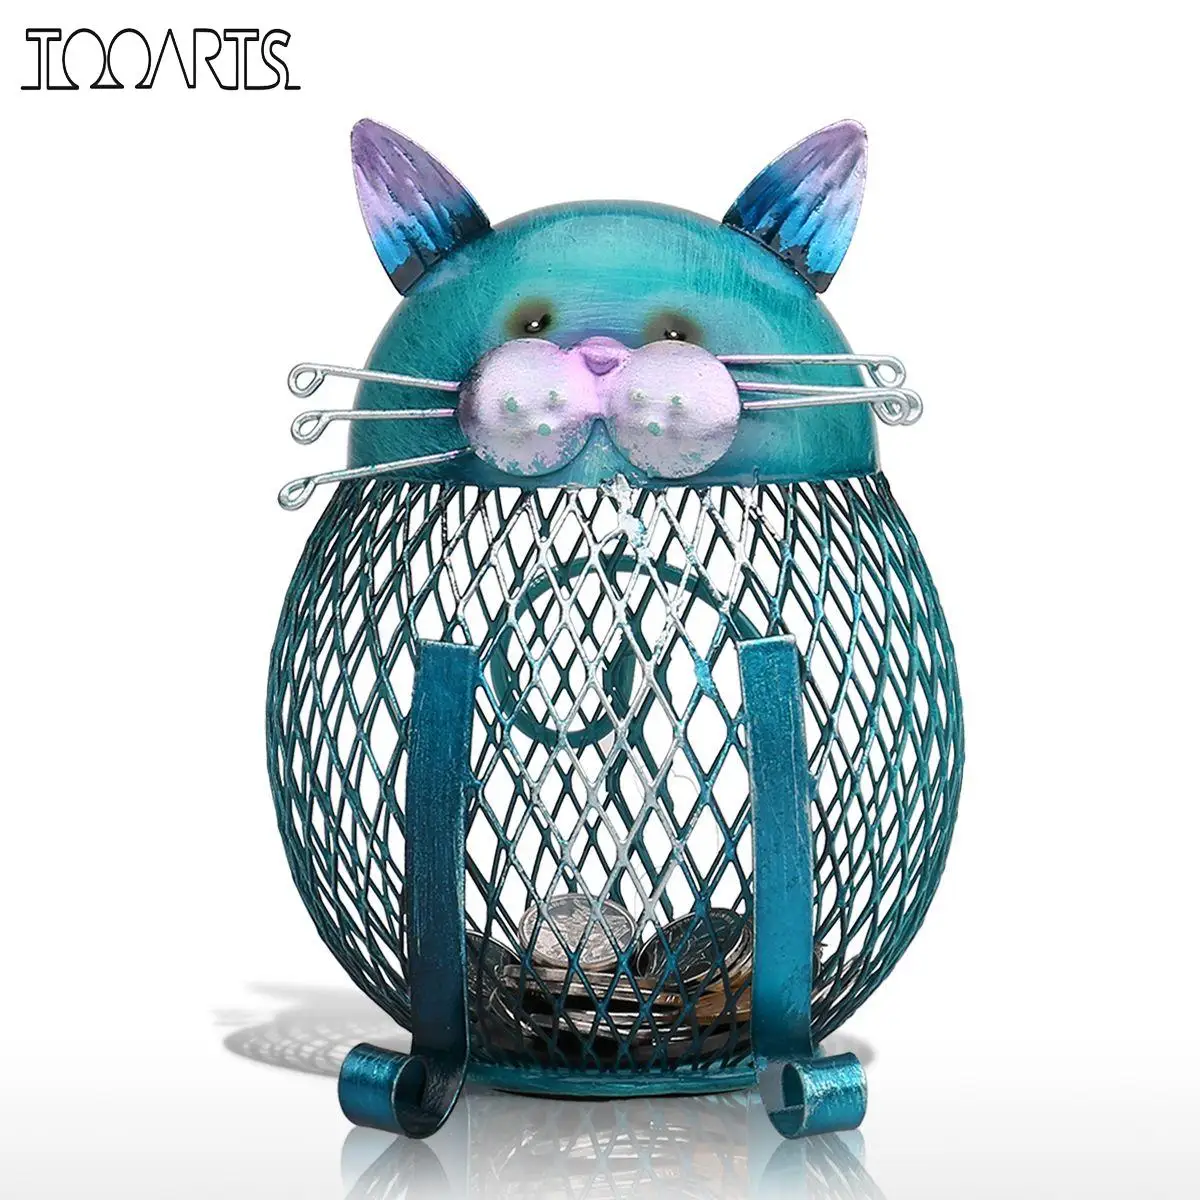 Tooarts Cat Piggy Bank Metal Coin Bank Money Box Figurines Coin Box Saving Money Home Decor New Year Christmas Gift For Kids